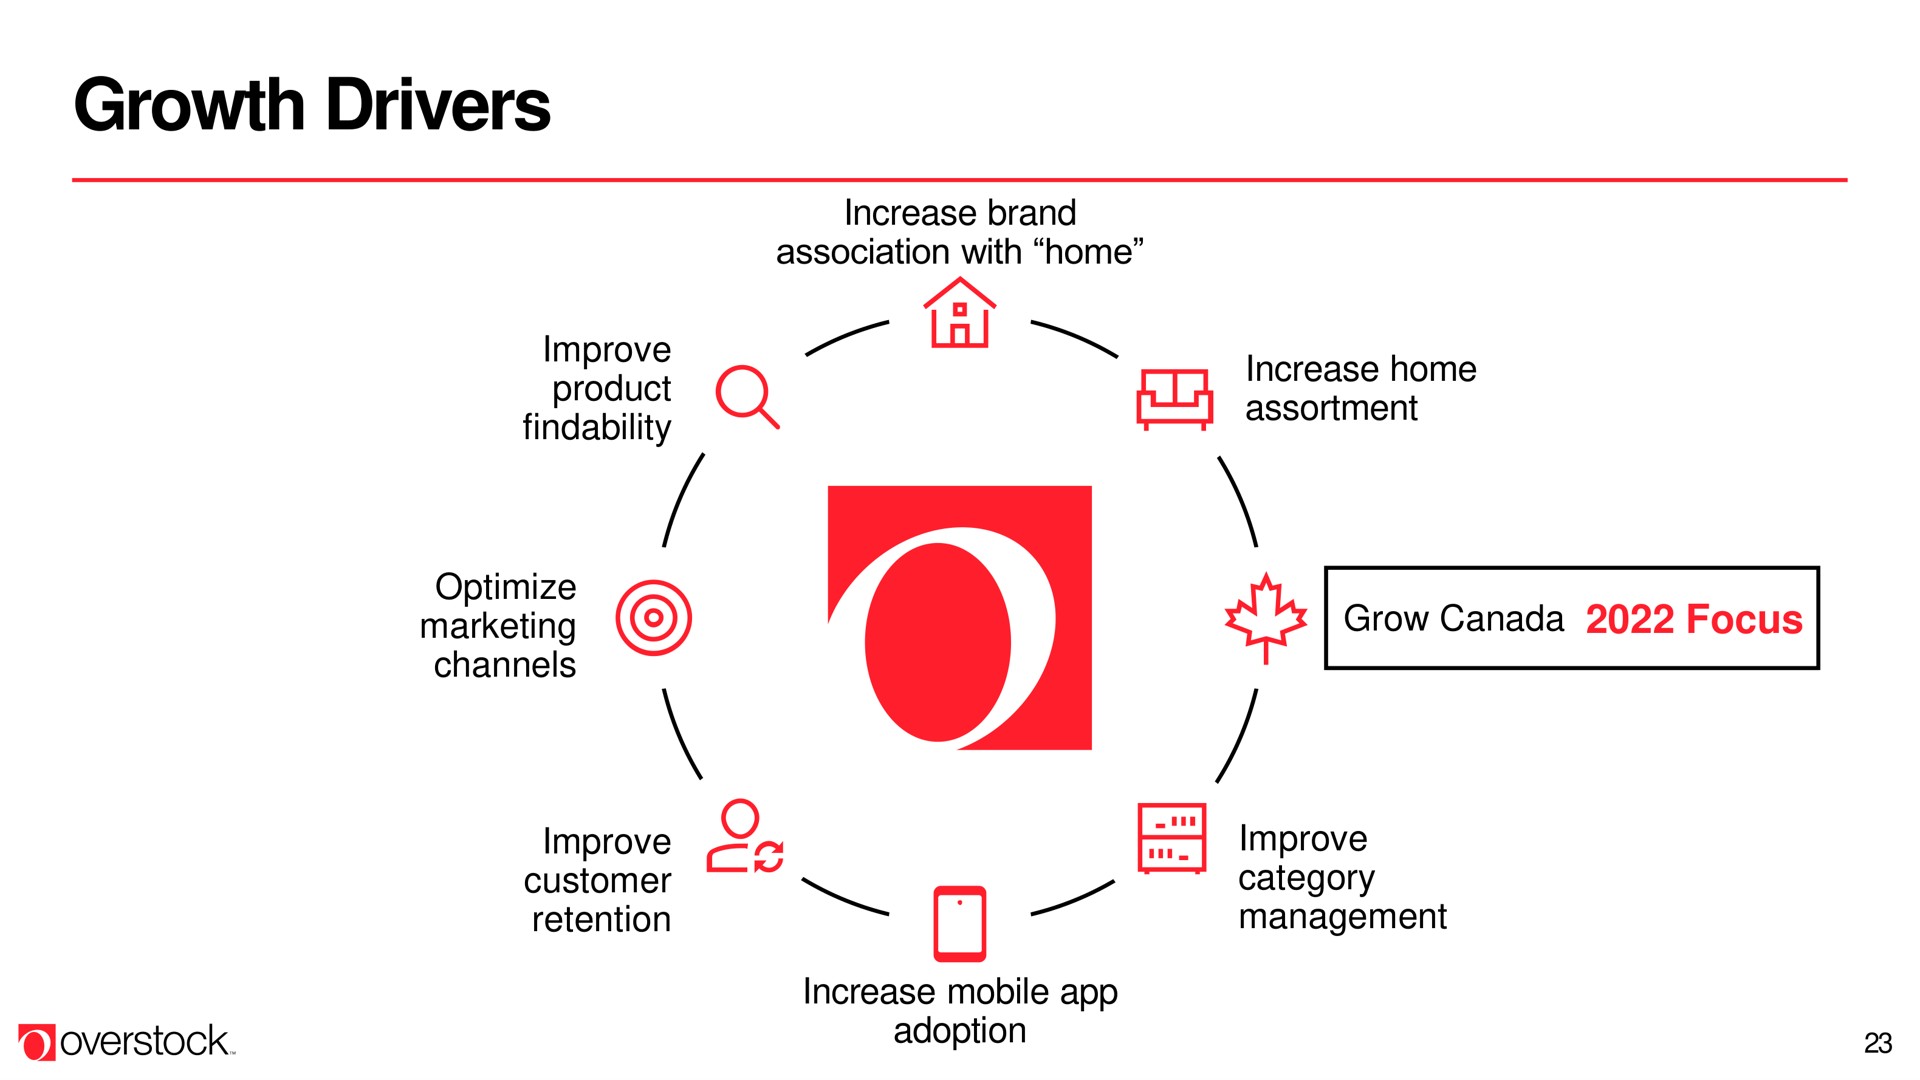 growth drivers | Overstock